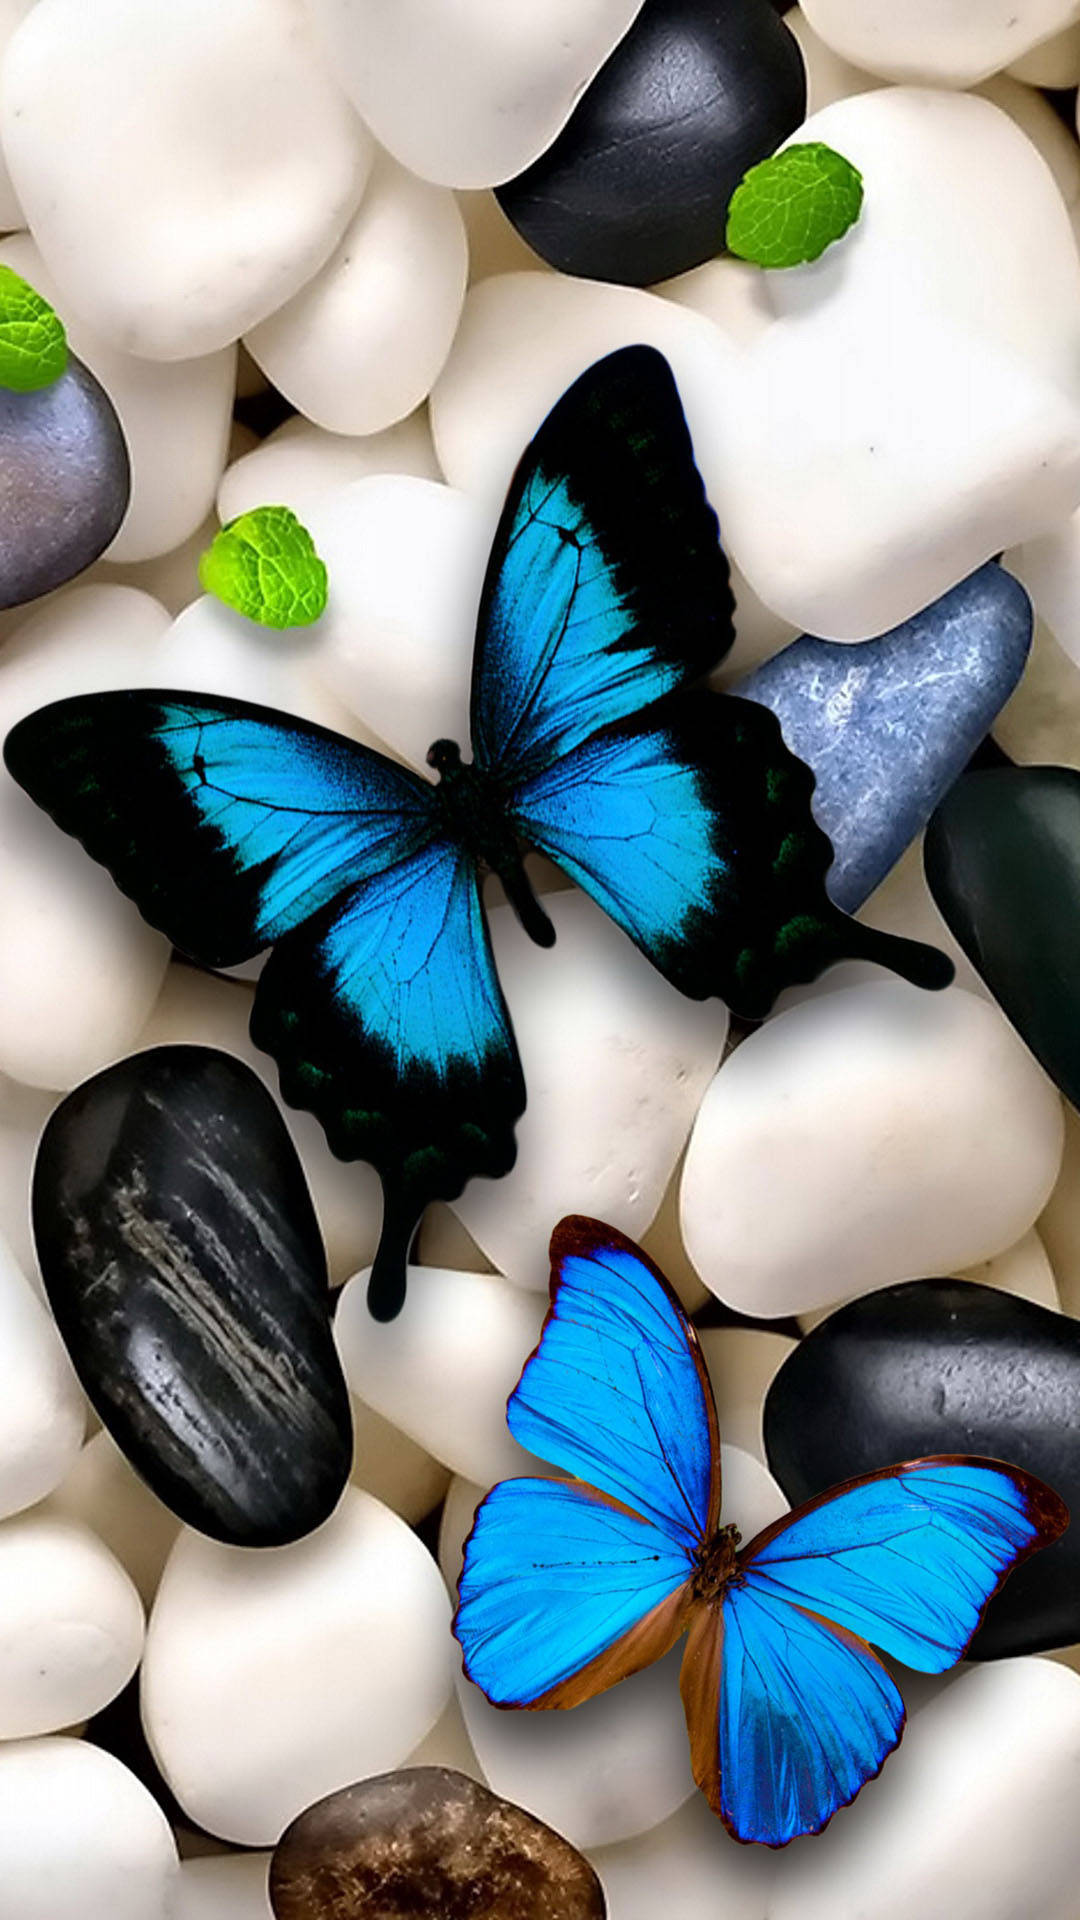 Butterfly Aesthetic On White Stones